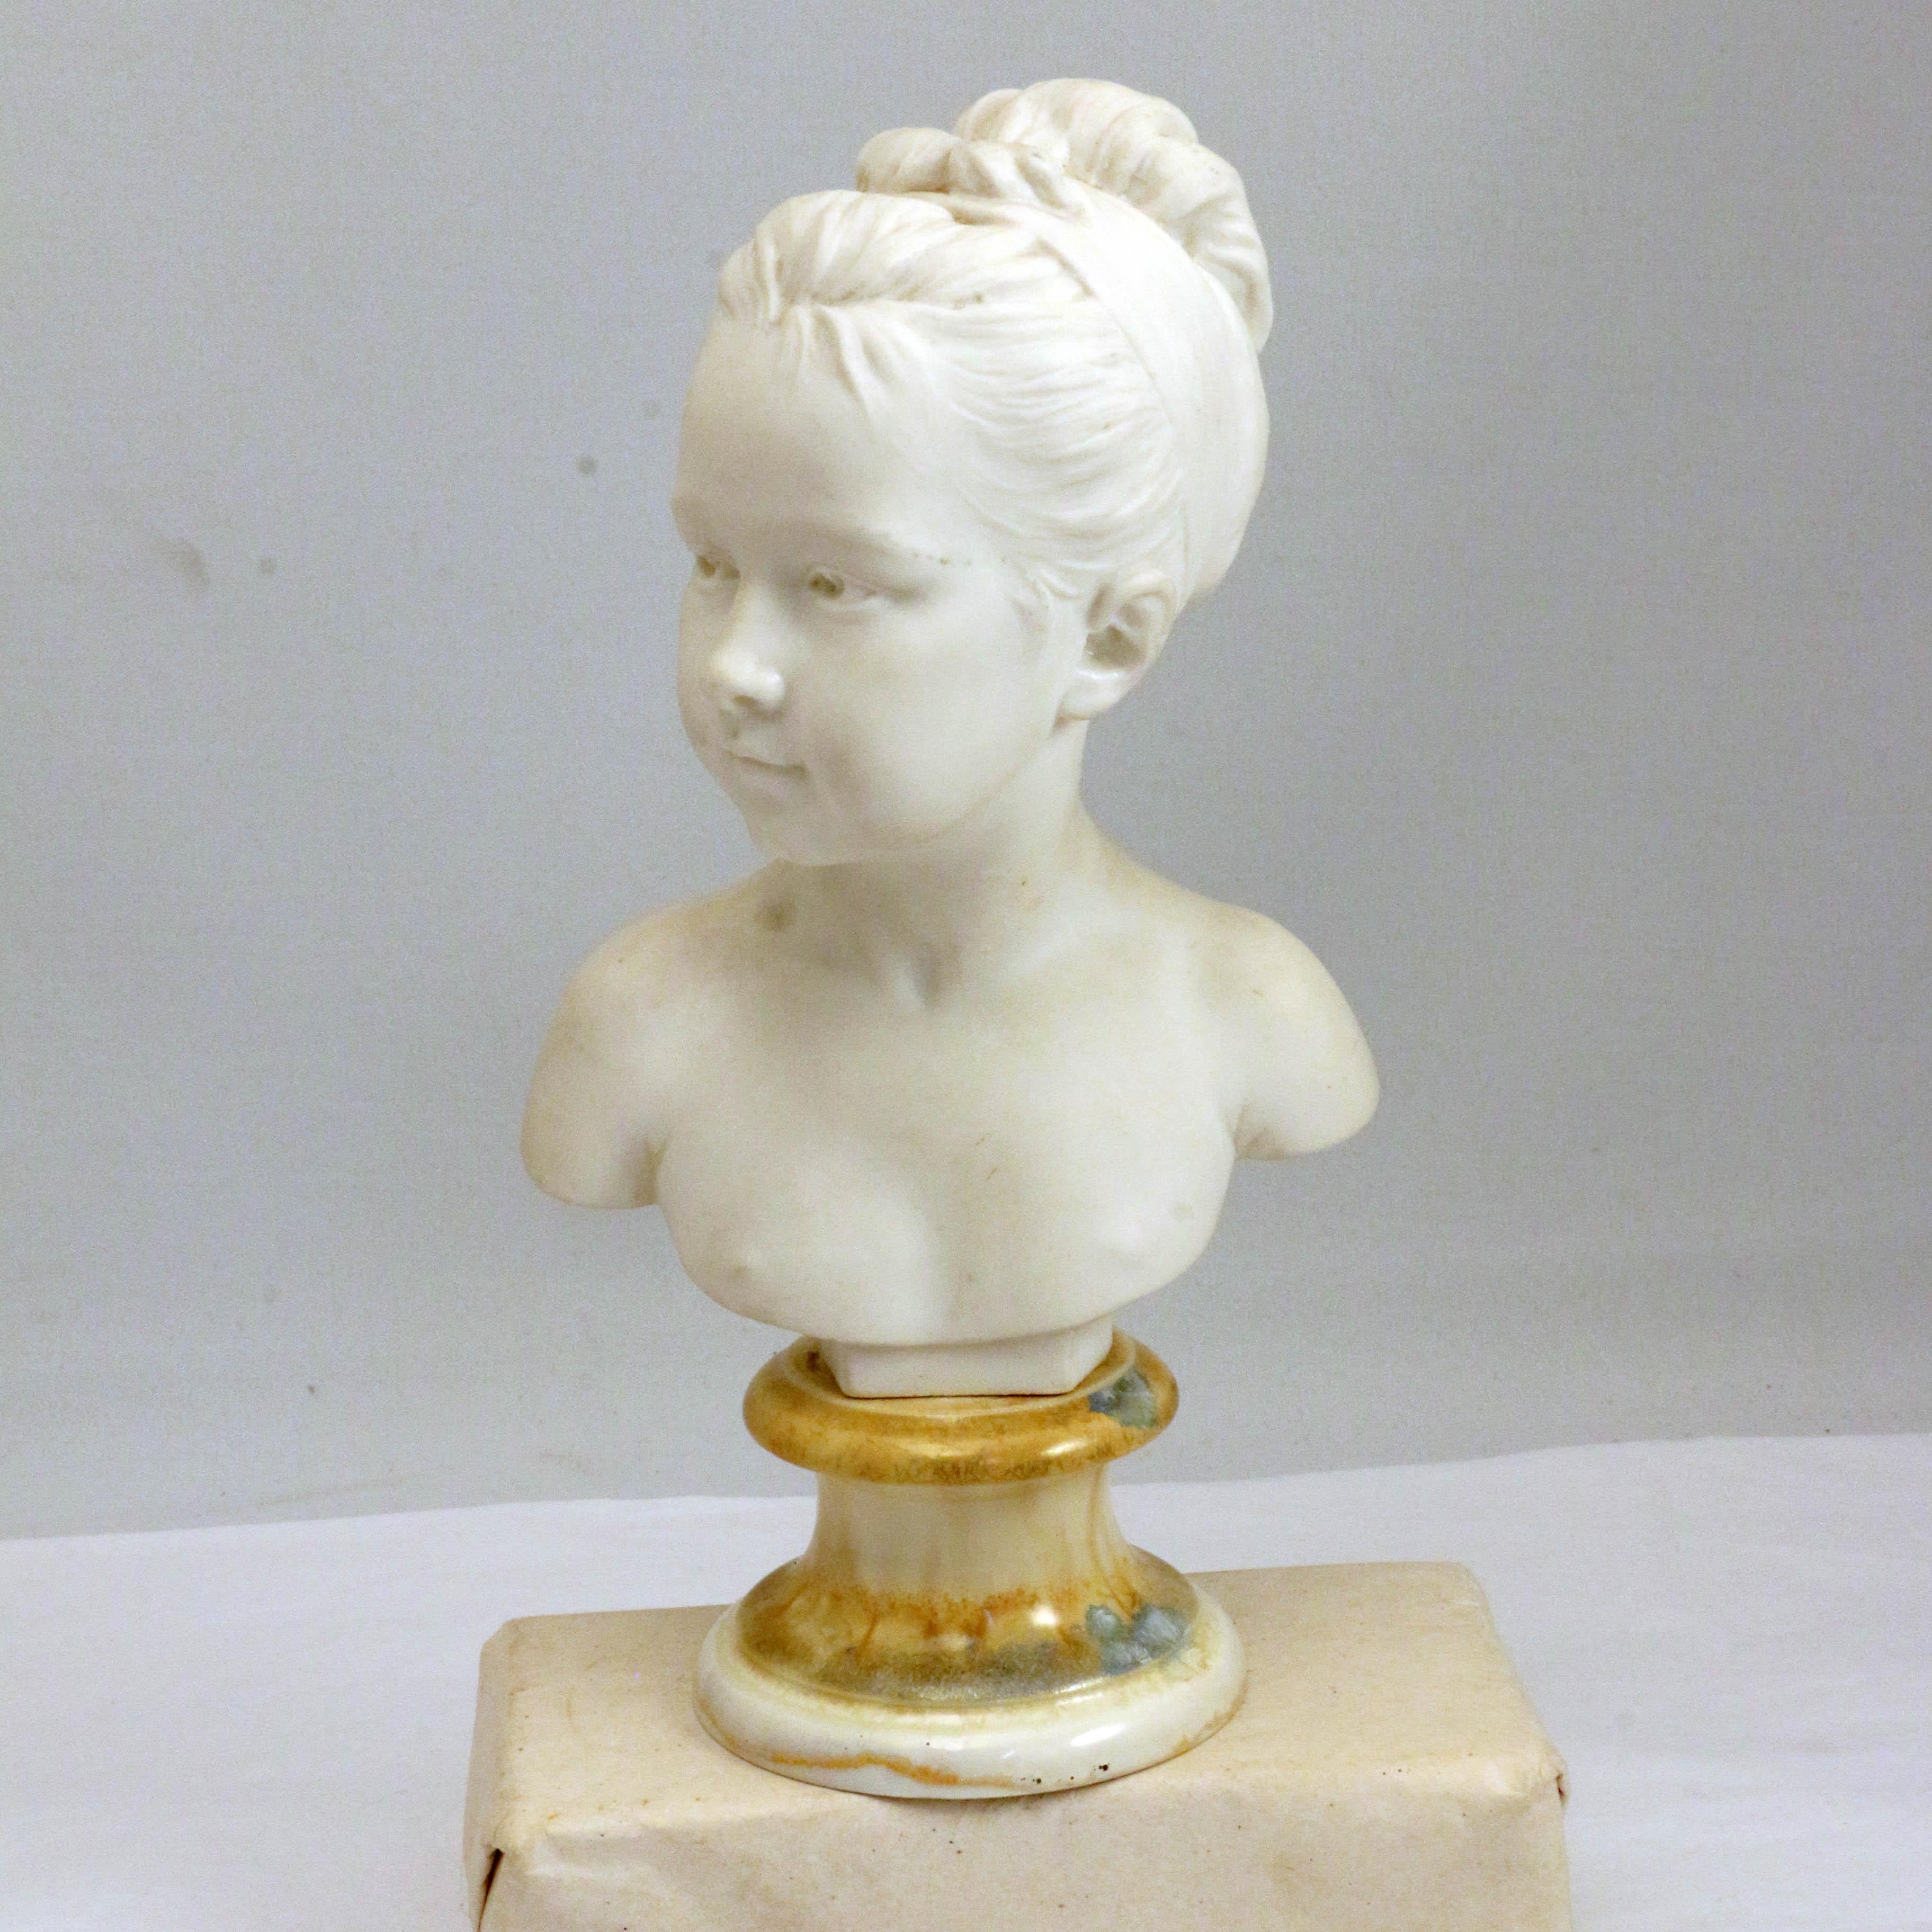 This ever popular subject, a pretty girl, has never been done better than Houdon's study of Louise de Brognard. This charming version by Sevres is well-modeled, bisque and on a simulated marble socle.